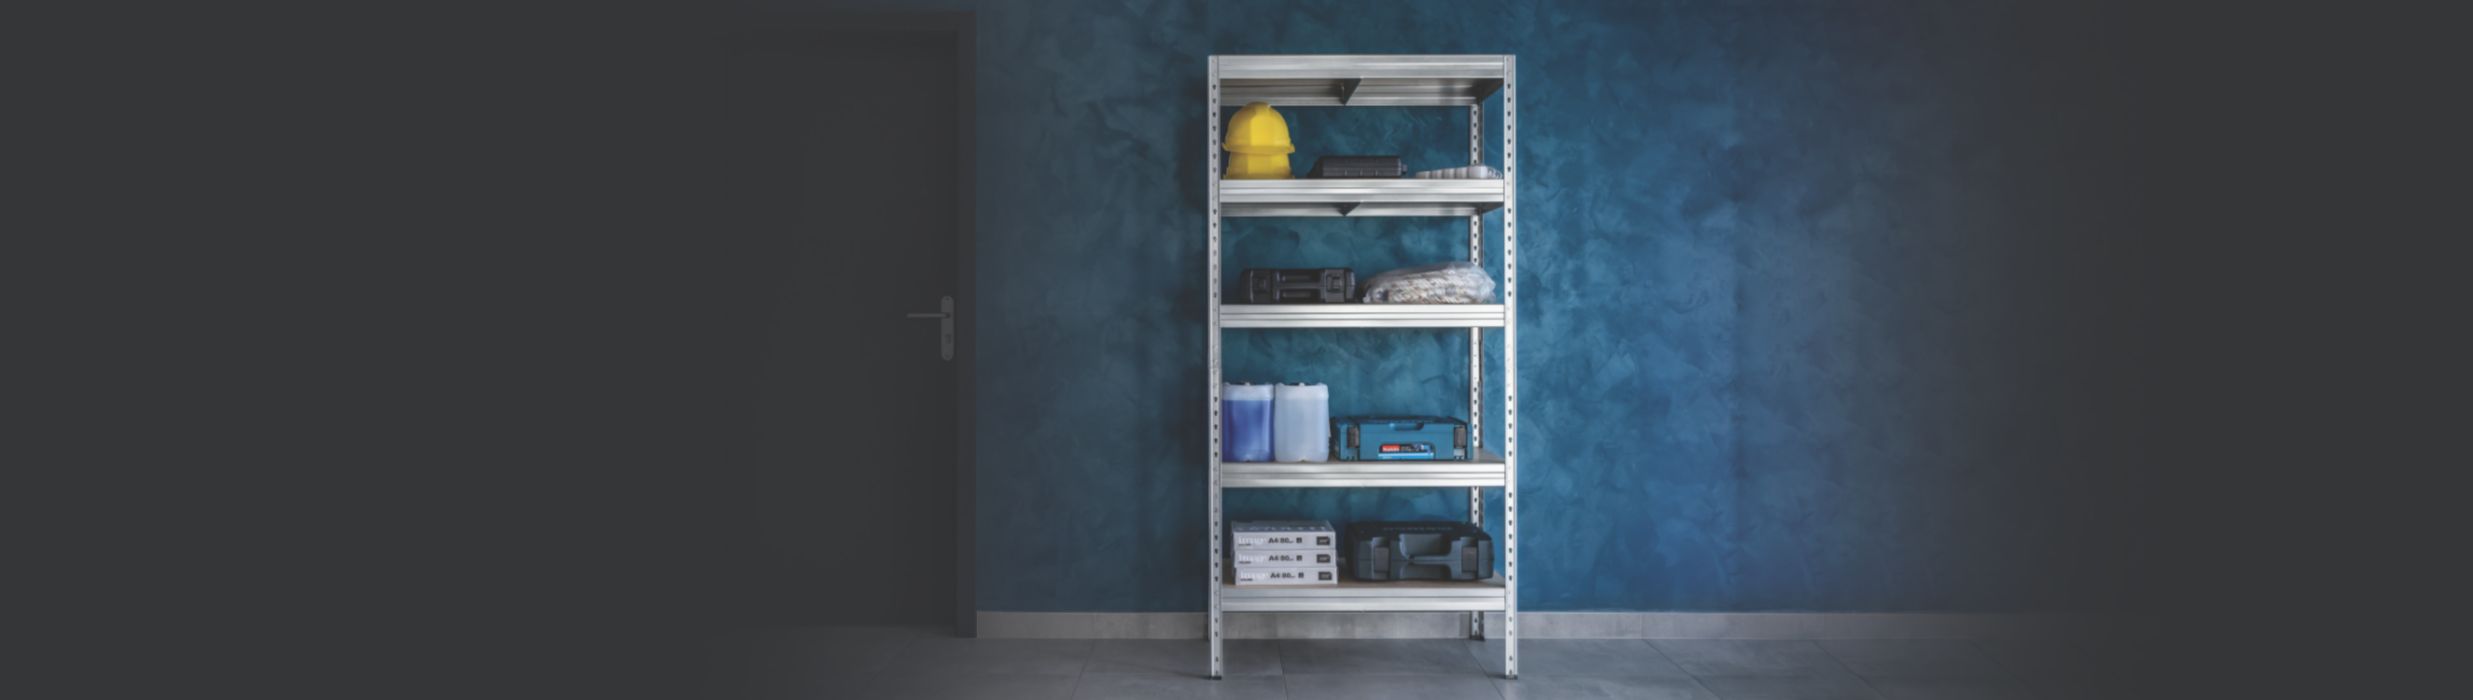 Buy 3 for £140 Inc VAT on this 5-Tier Galvanised Steel Shelving Unit